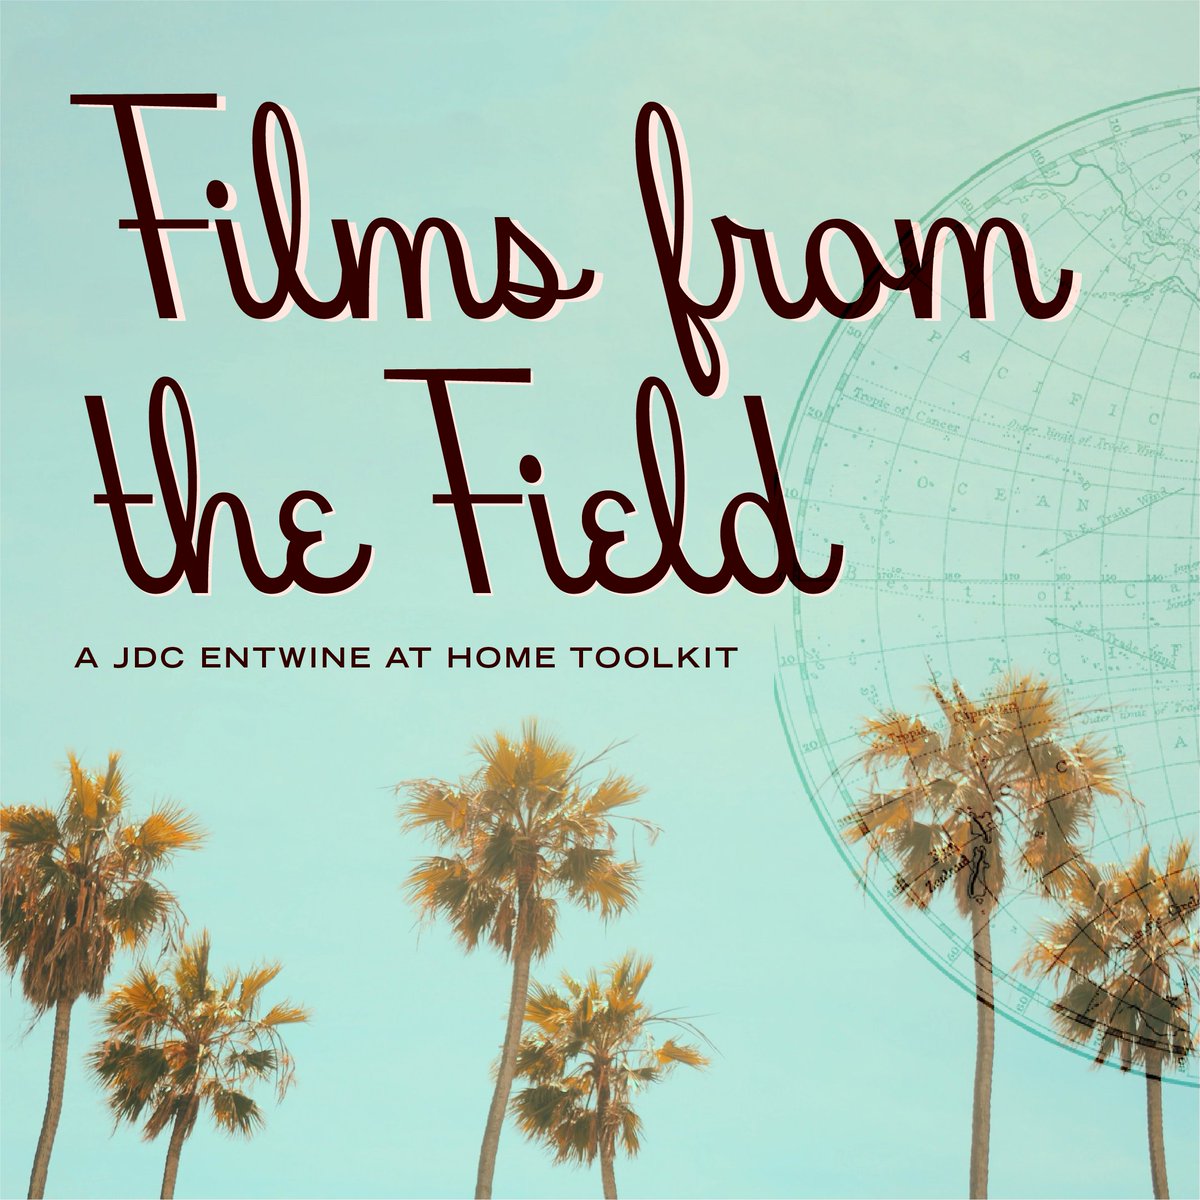 Allow us to re-introduce our latest JDC Entwine at Home Toolkit: Films from the Field! Tap into the magic of film to discover the stories of global Jewish communities from any screen near you. Register now for access to our latest digital toolkit: jdcentwine.org/filmsfromthefi…